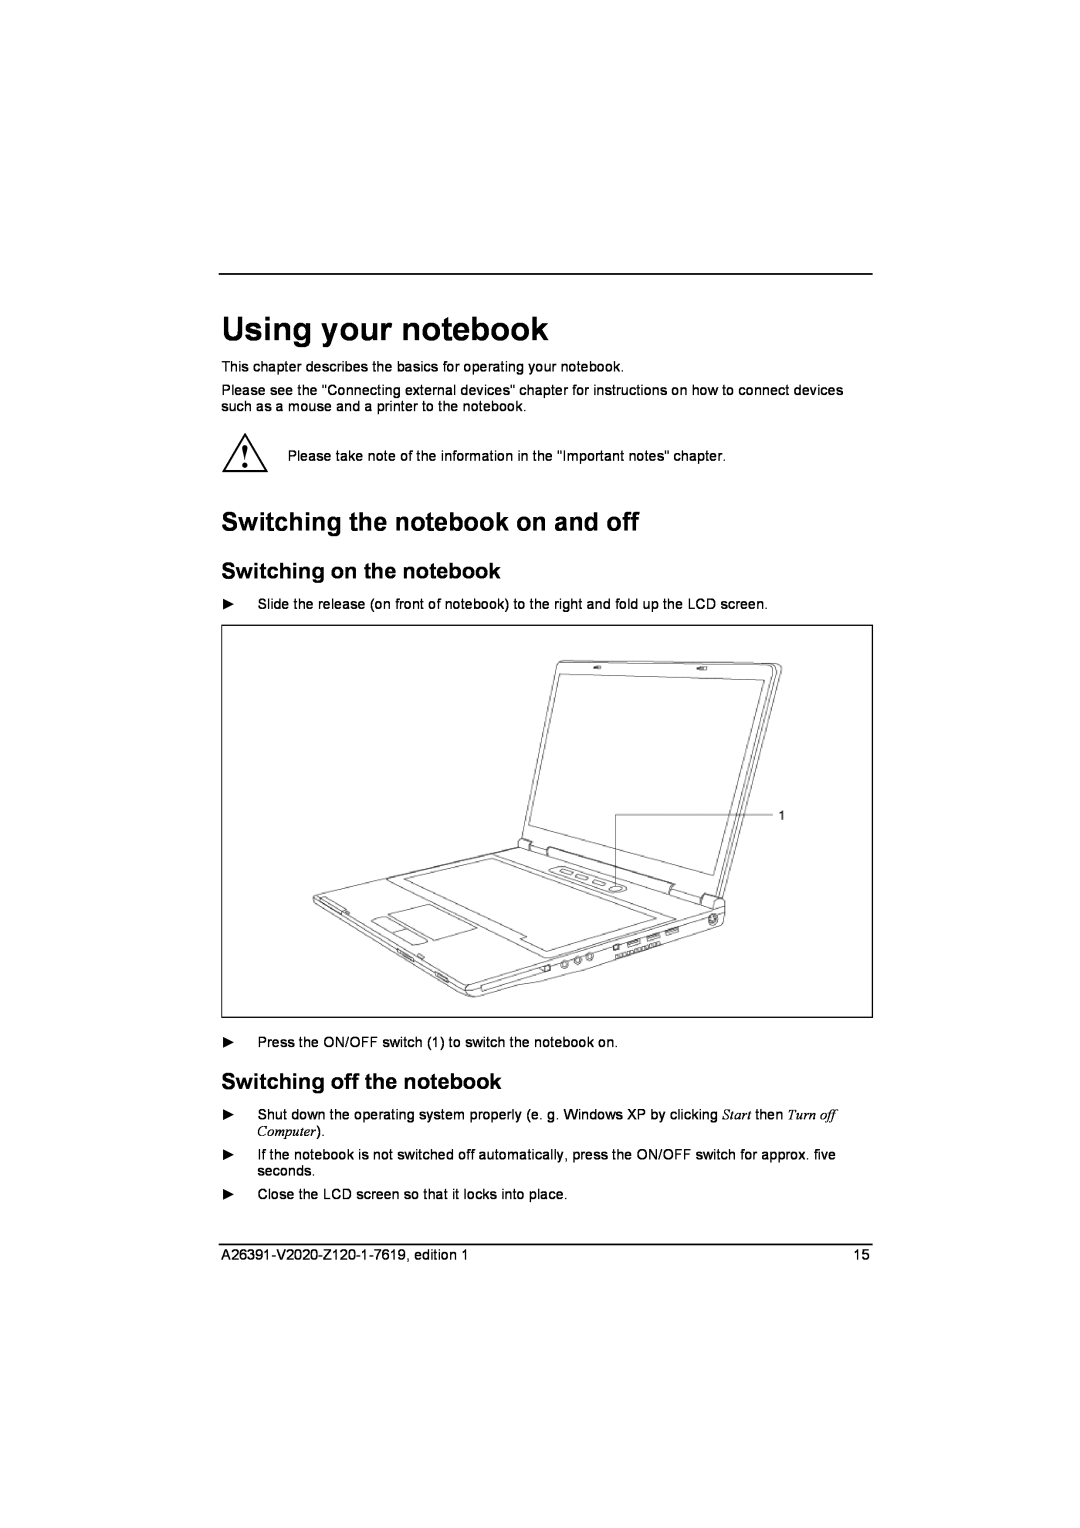 Fujitsu Siemens Computers V2020 manual Using your notebook, Switching the notebook on and off, Switching on the notebook 